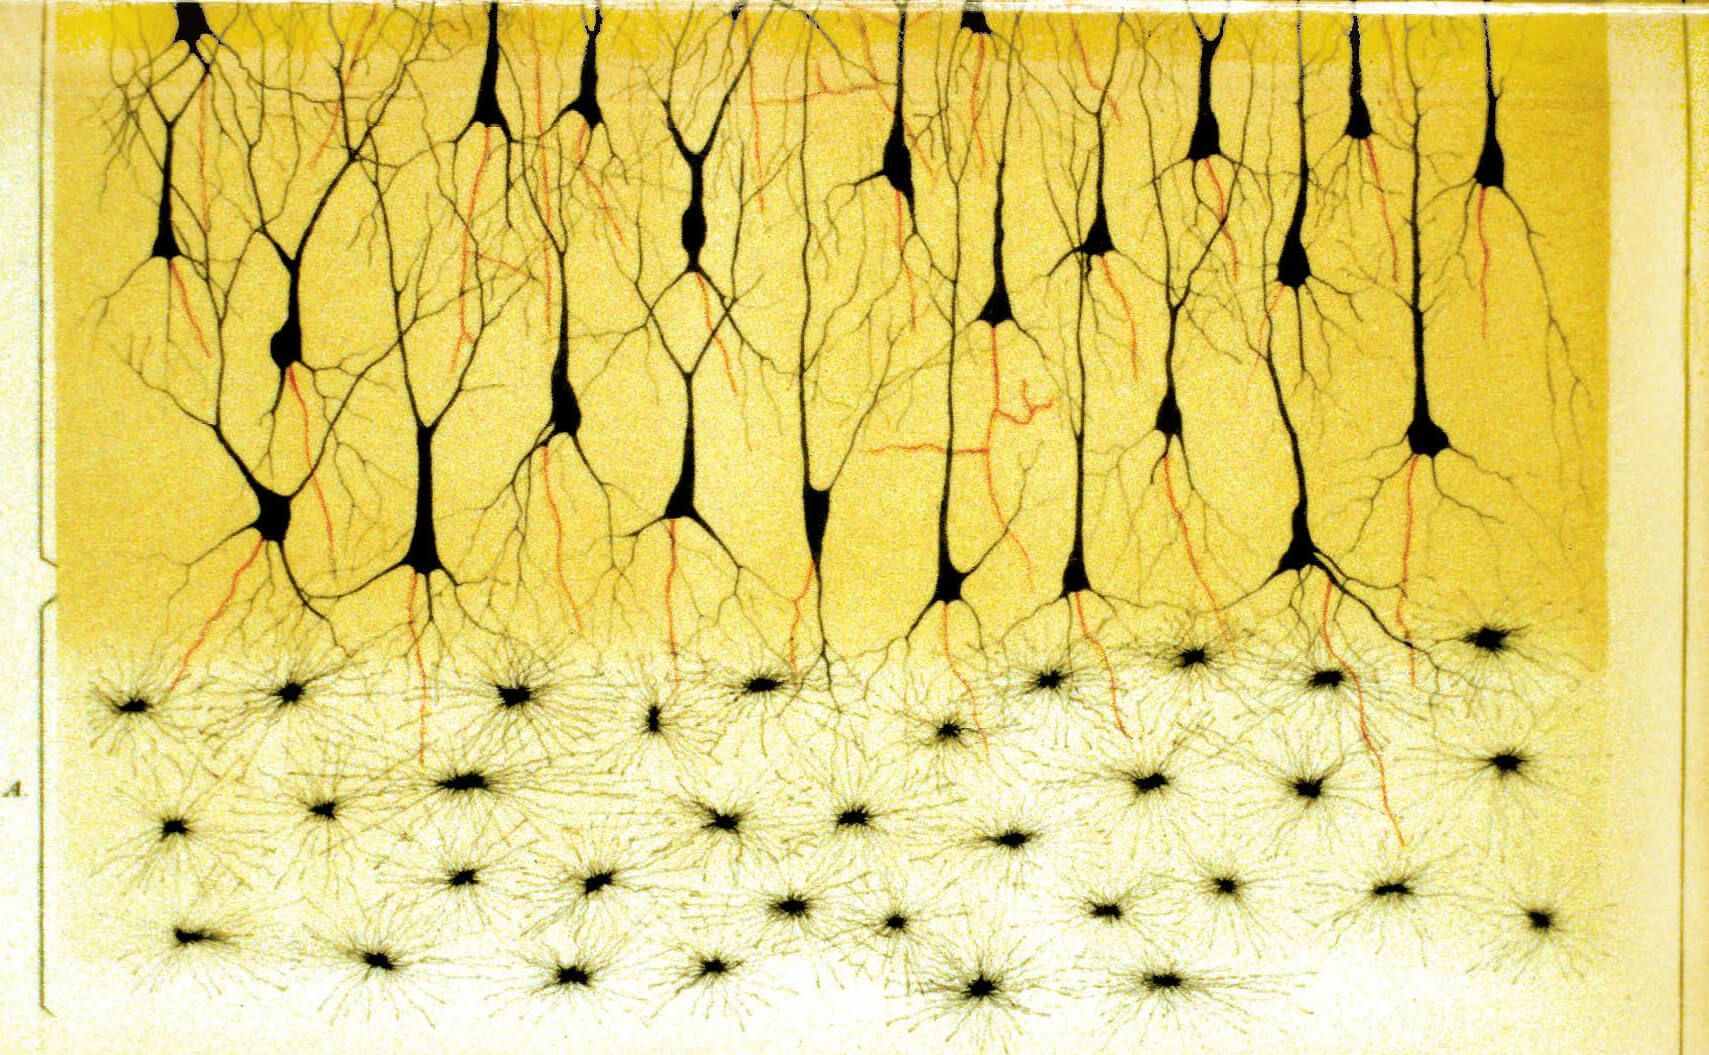 6 Views of a Neuron by Golgi and Cajal